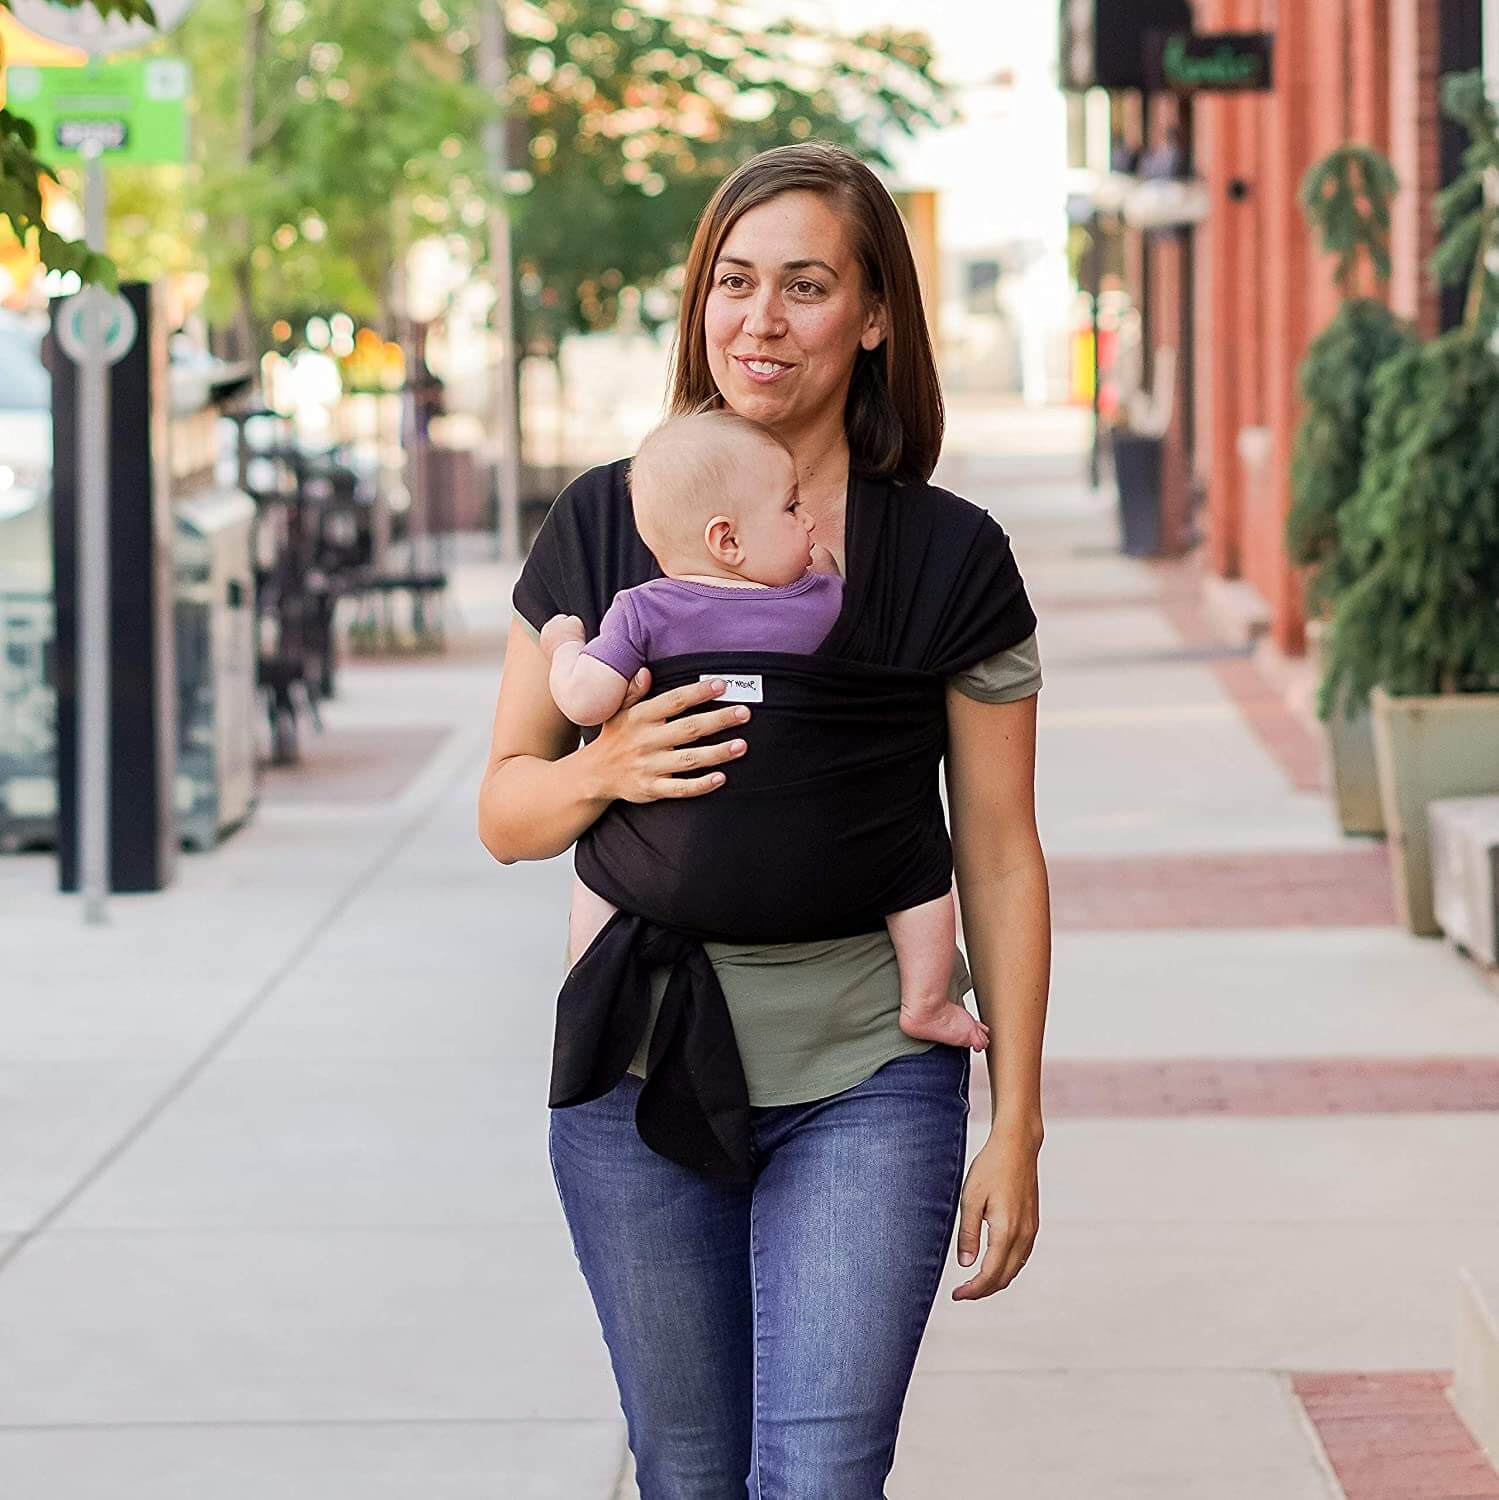 A mother walking down a city street with her baby in a baby carrier.